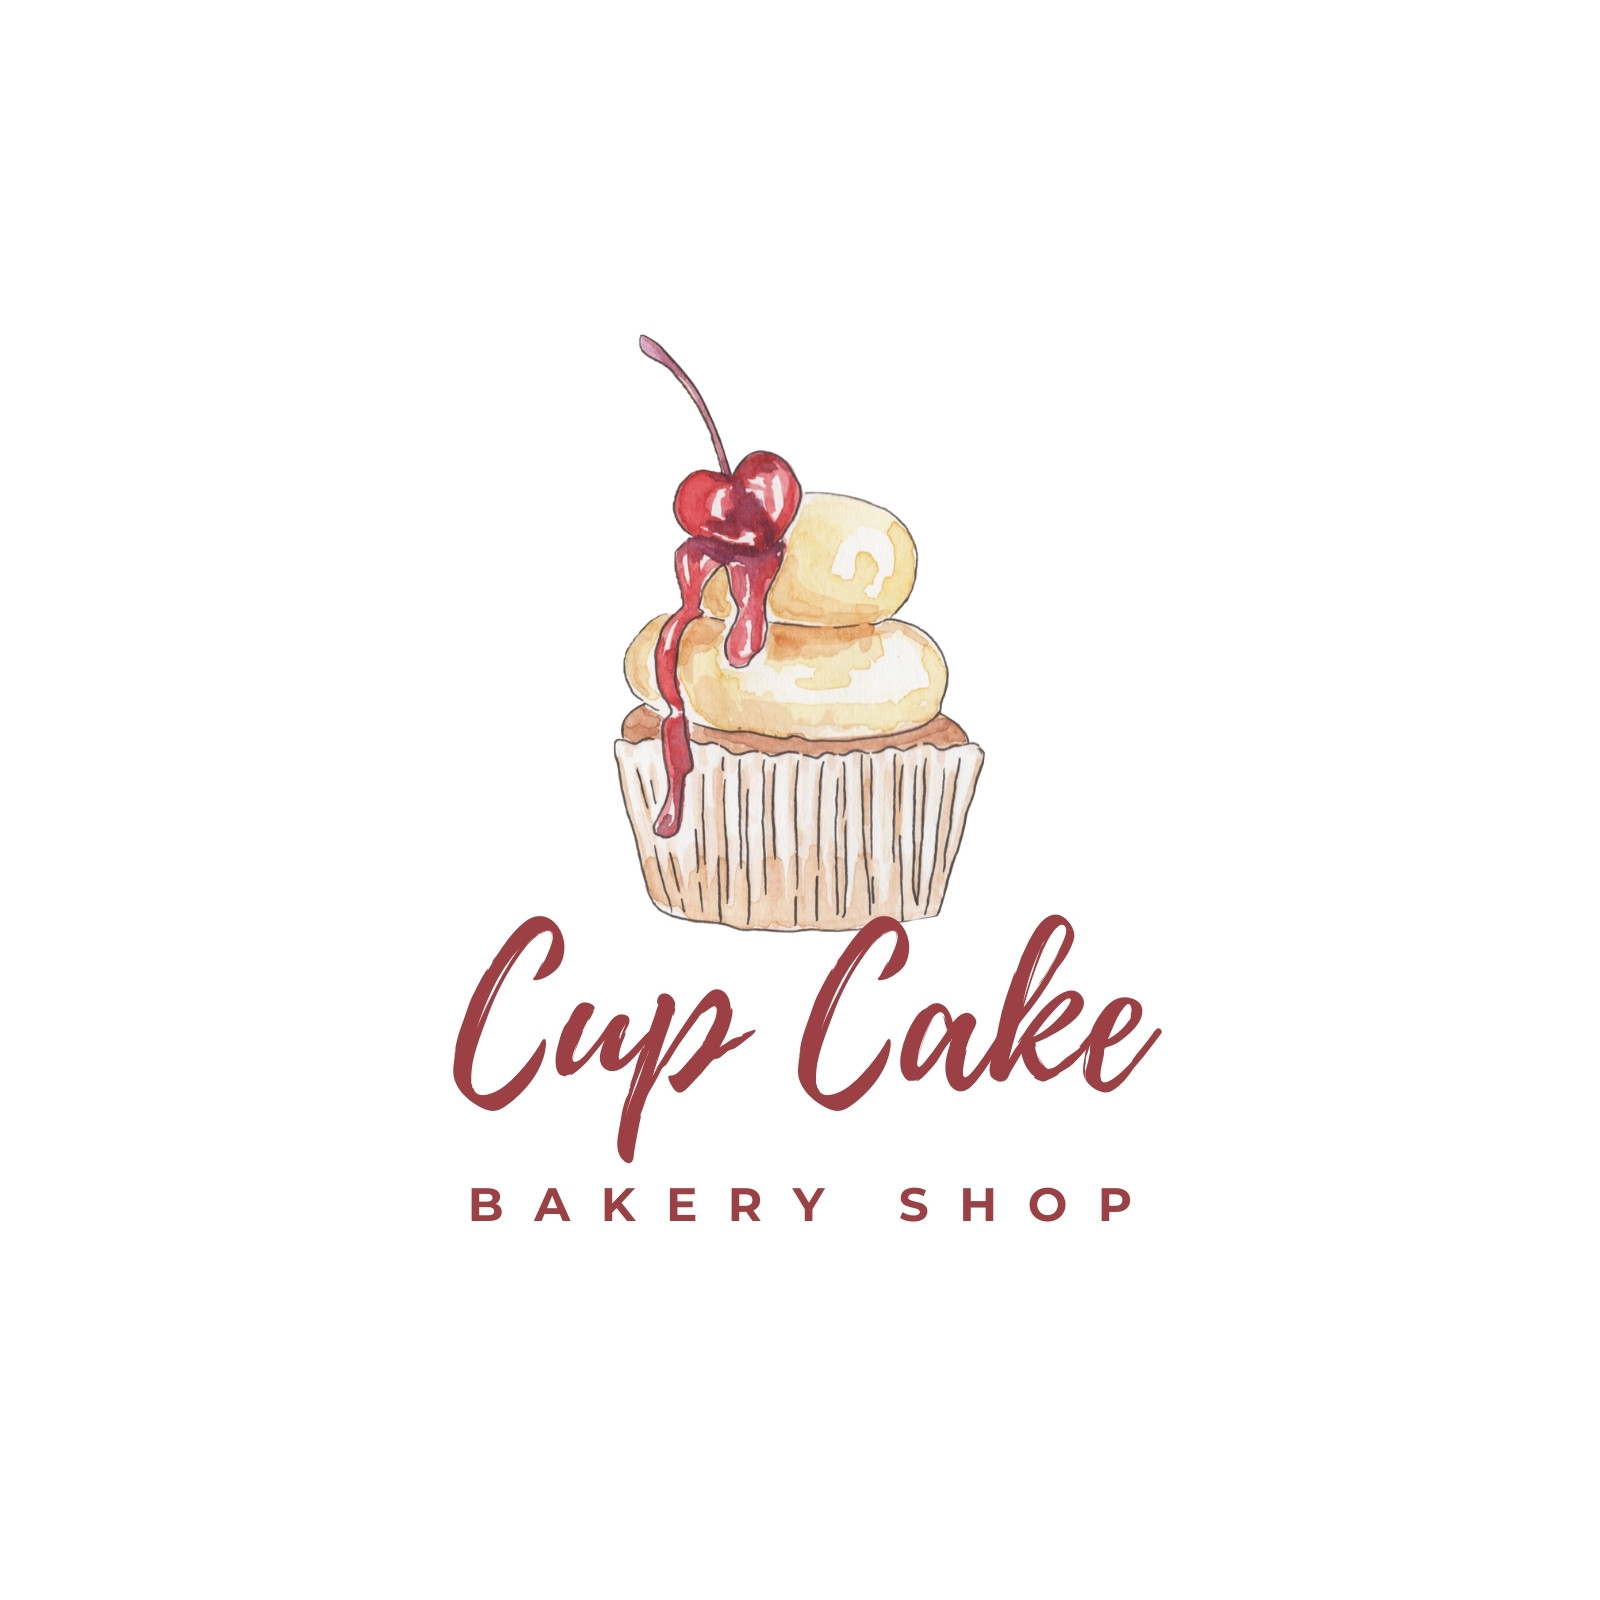 Details more than 86 free logo for cake business - in.daotaonec